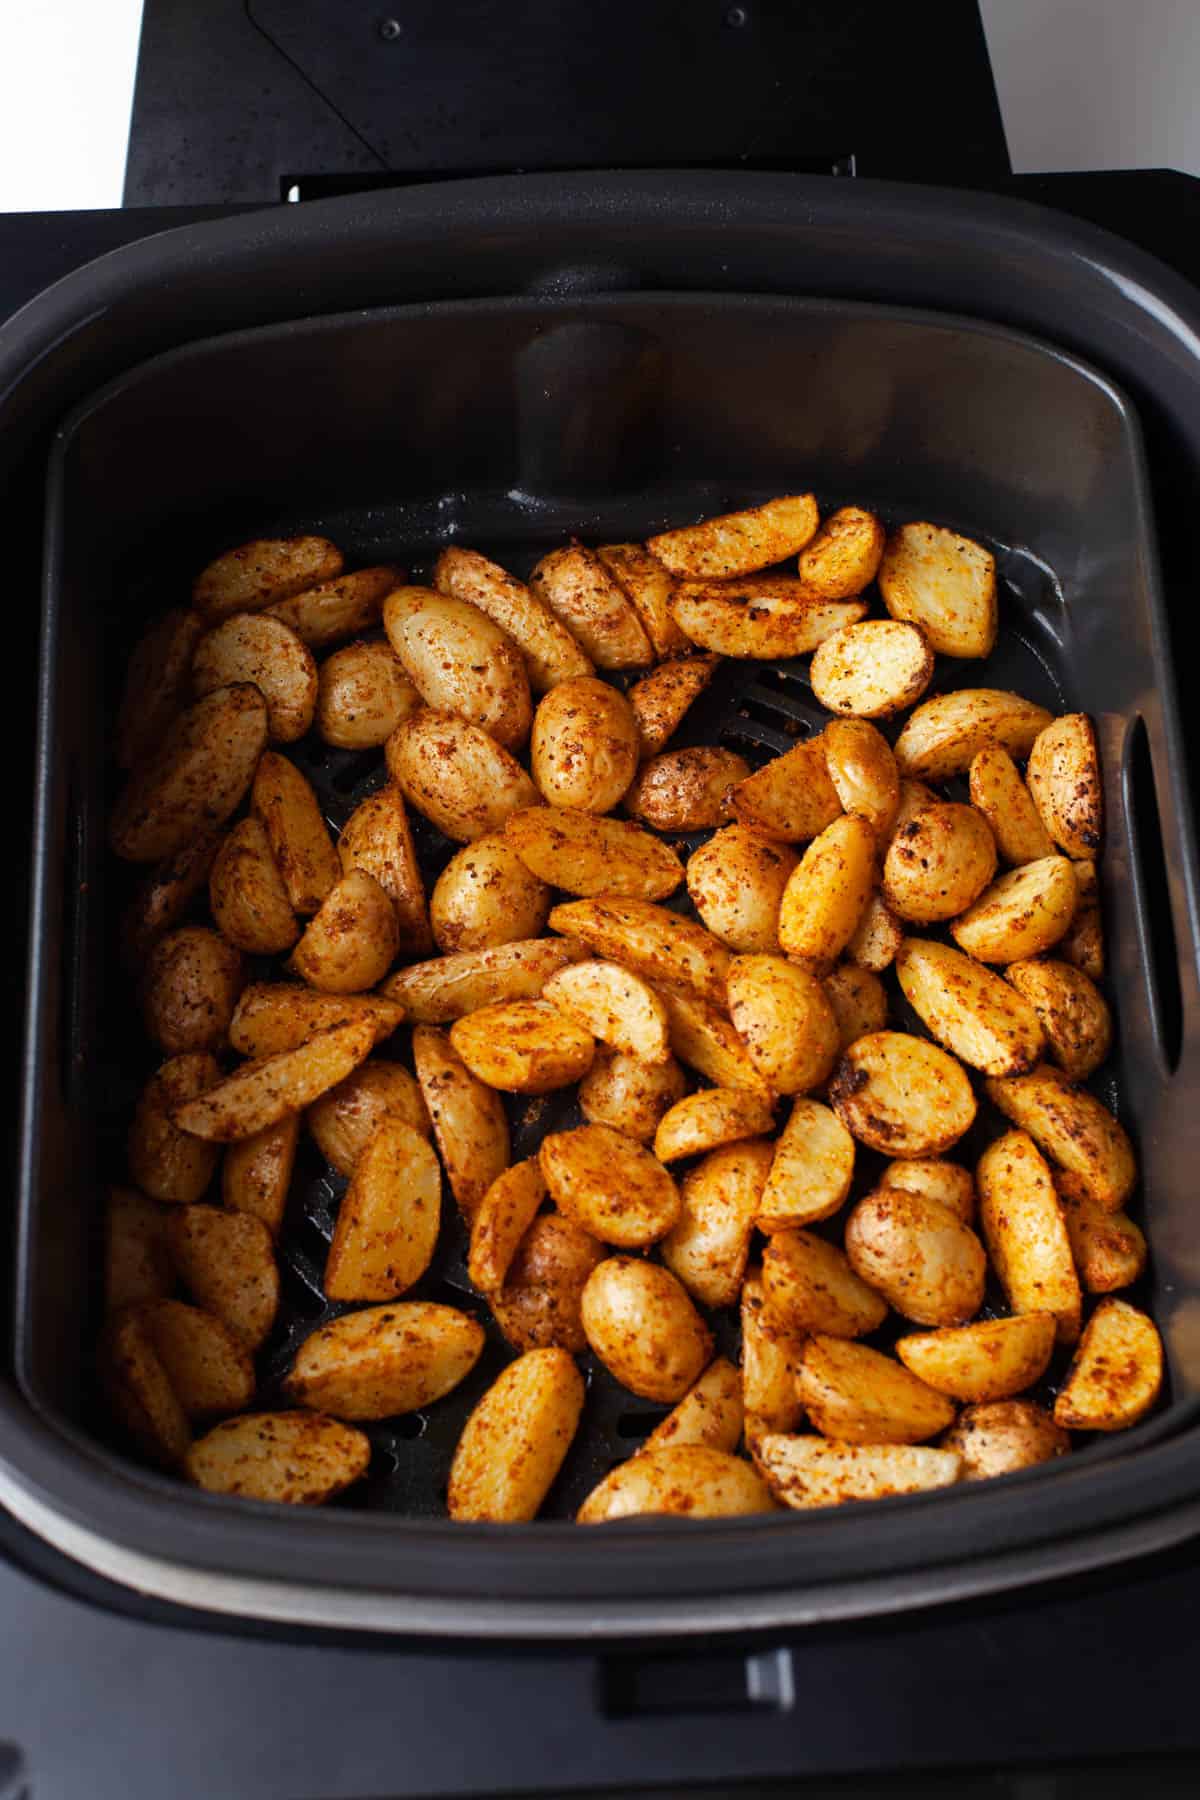 Top view of air fryer basket with chopped and seasoned potatoes in it. 